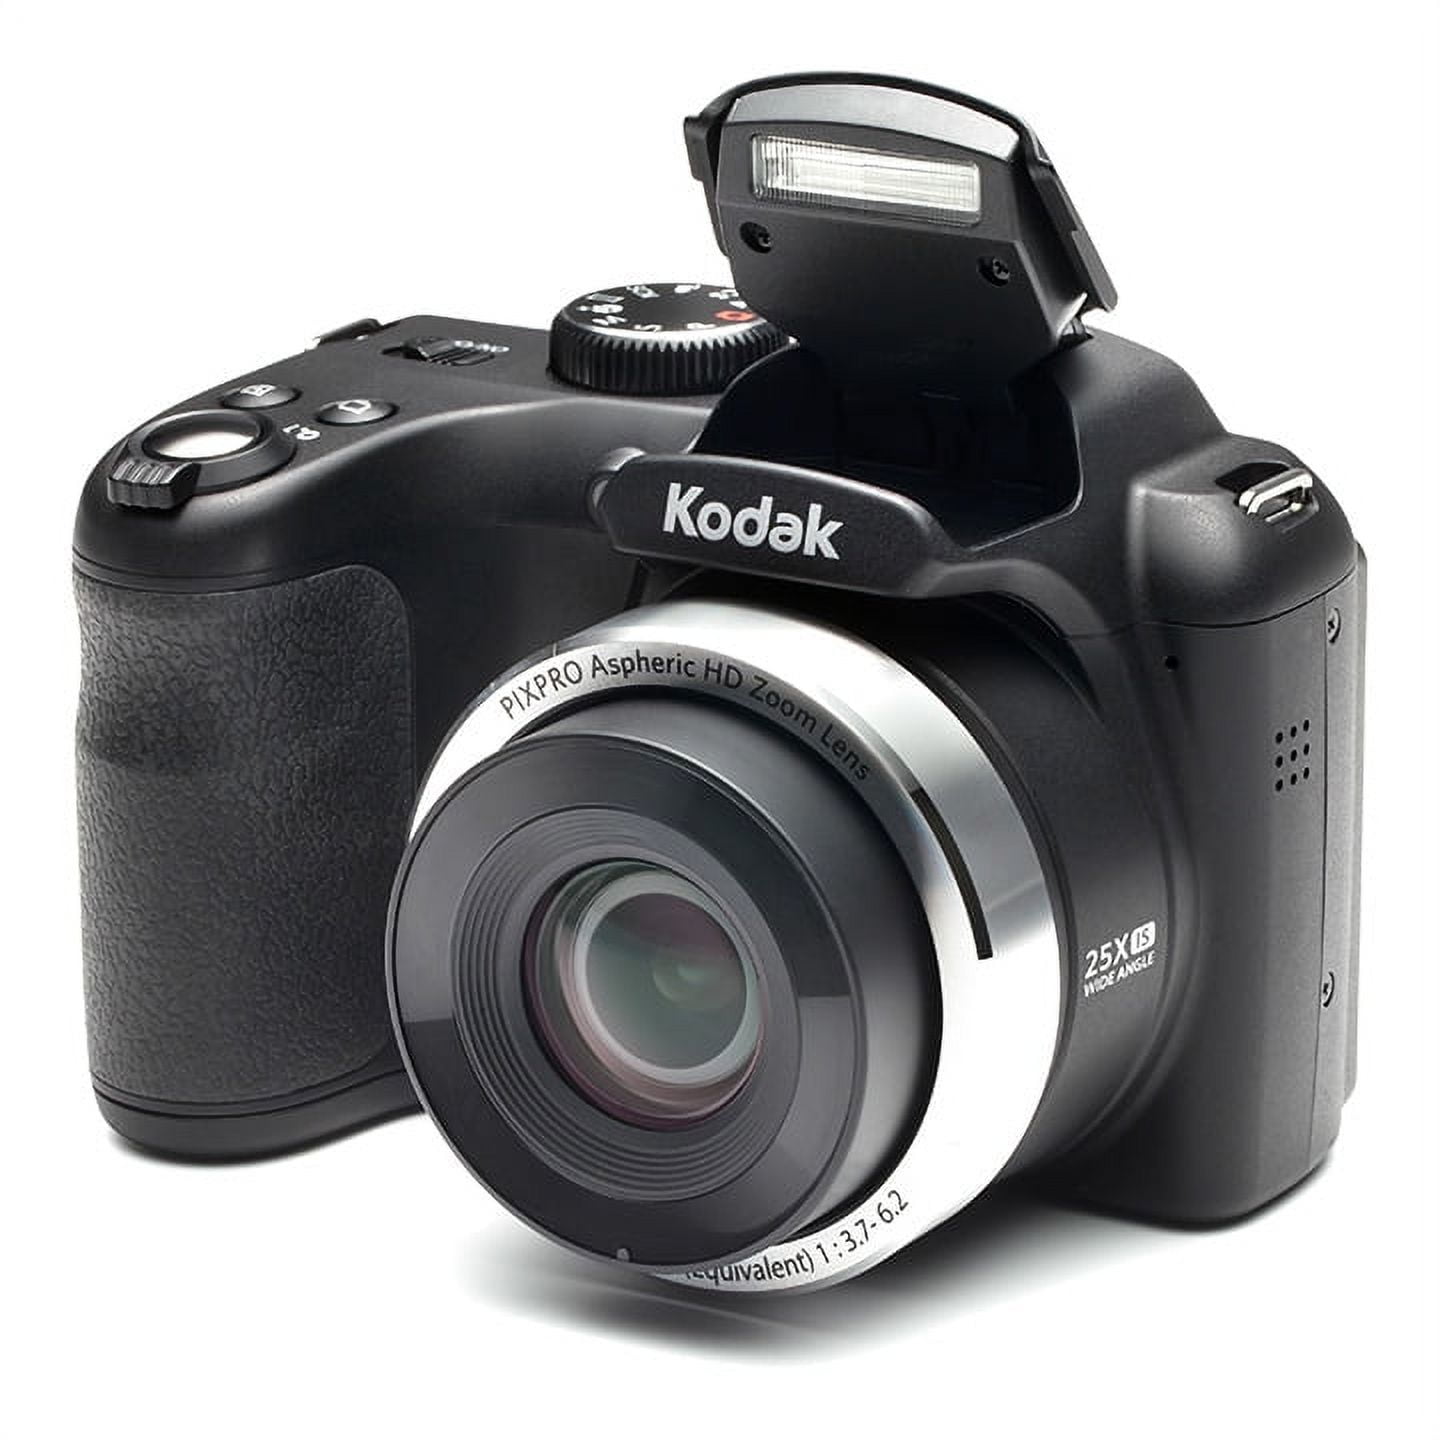 Kodak Updates PIXPRO Cameras With 25x, 40x and 42x Bridge Cameras & 2  Entry-Level Compacts